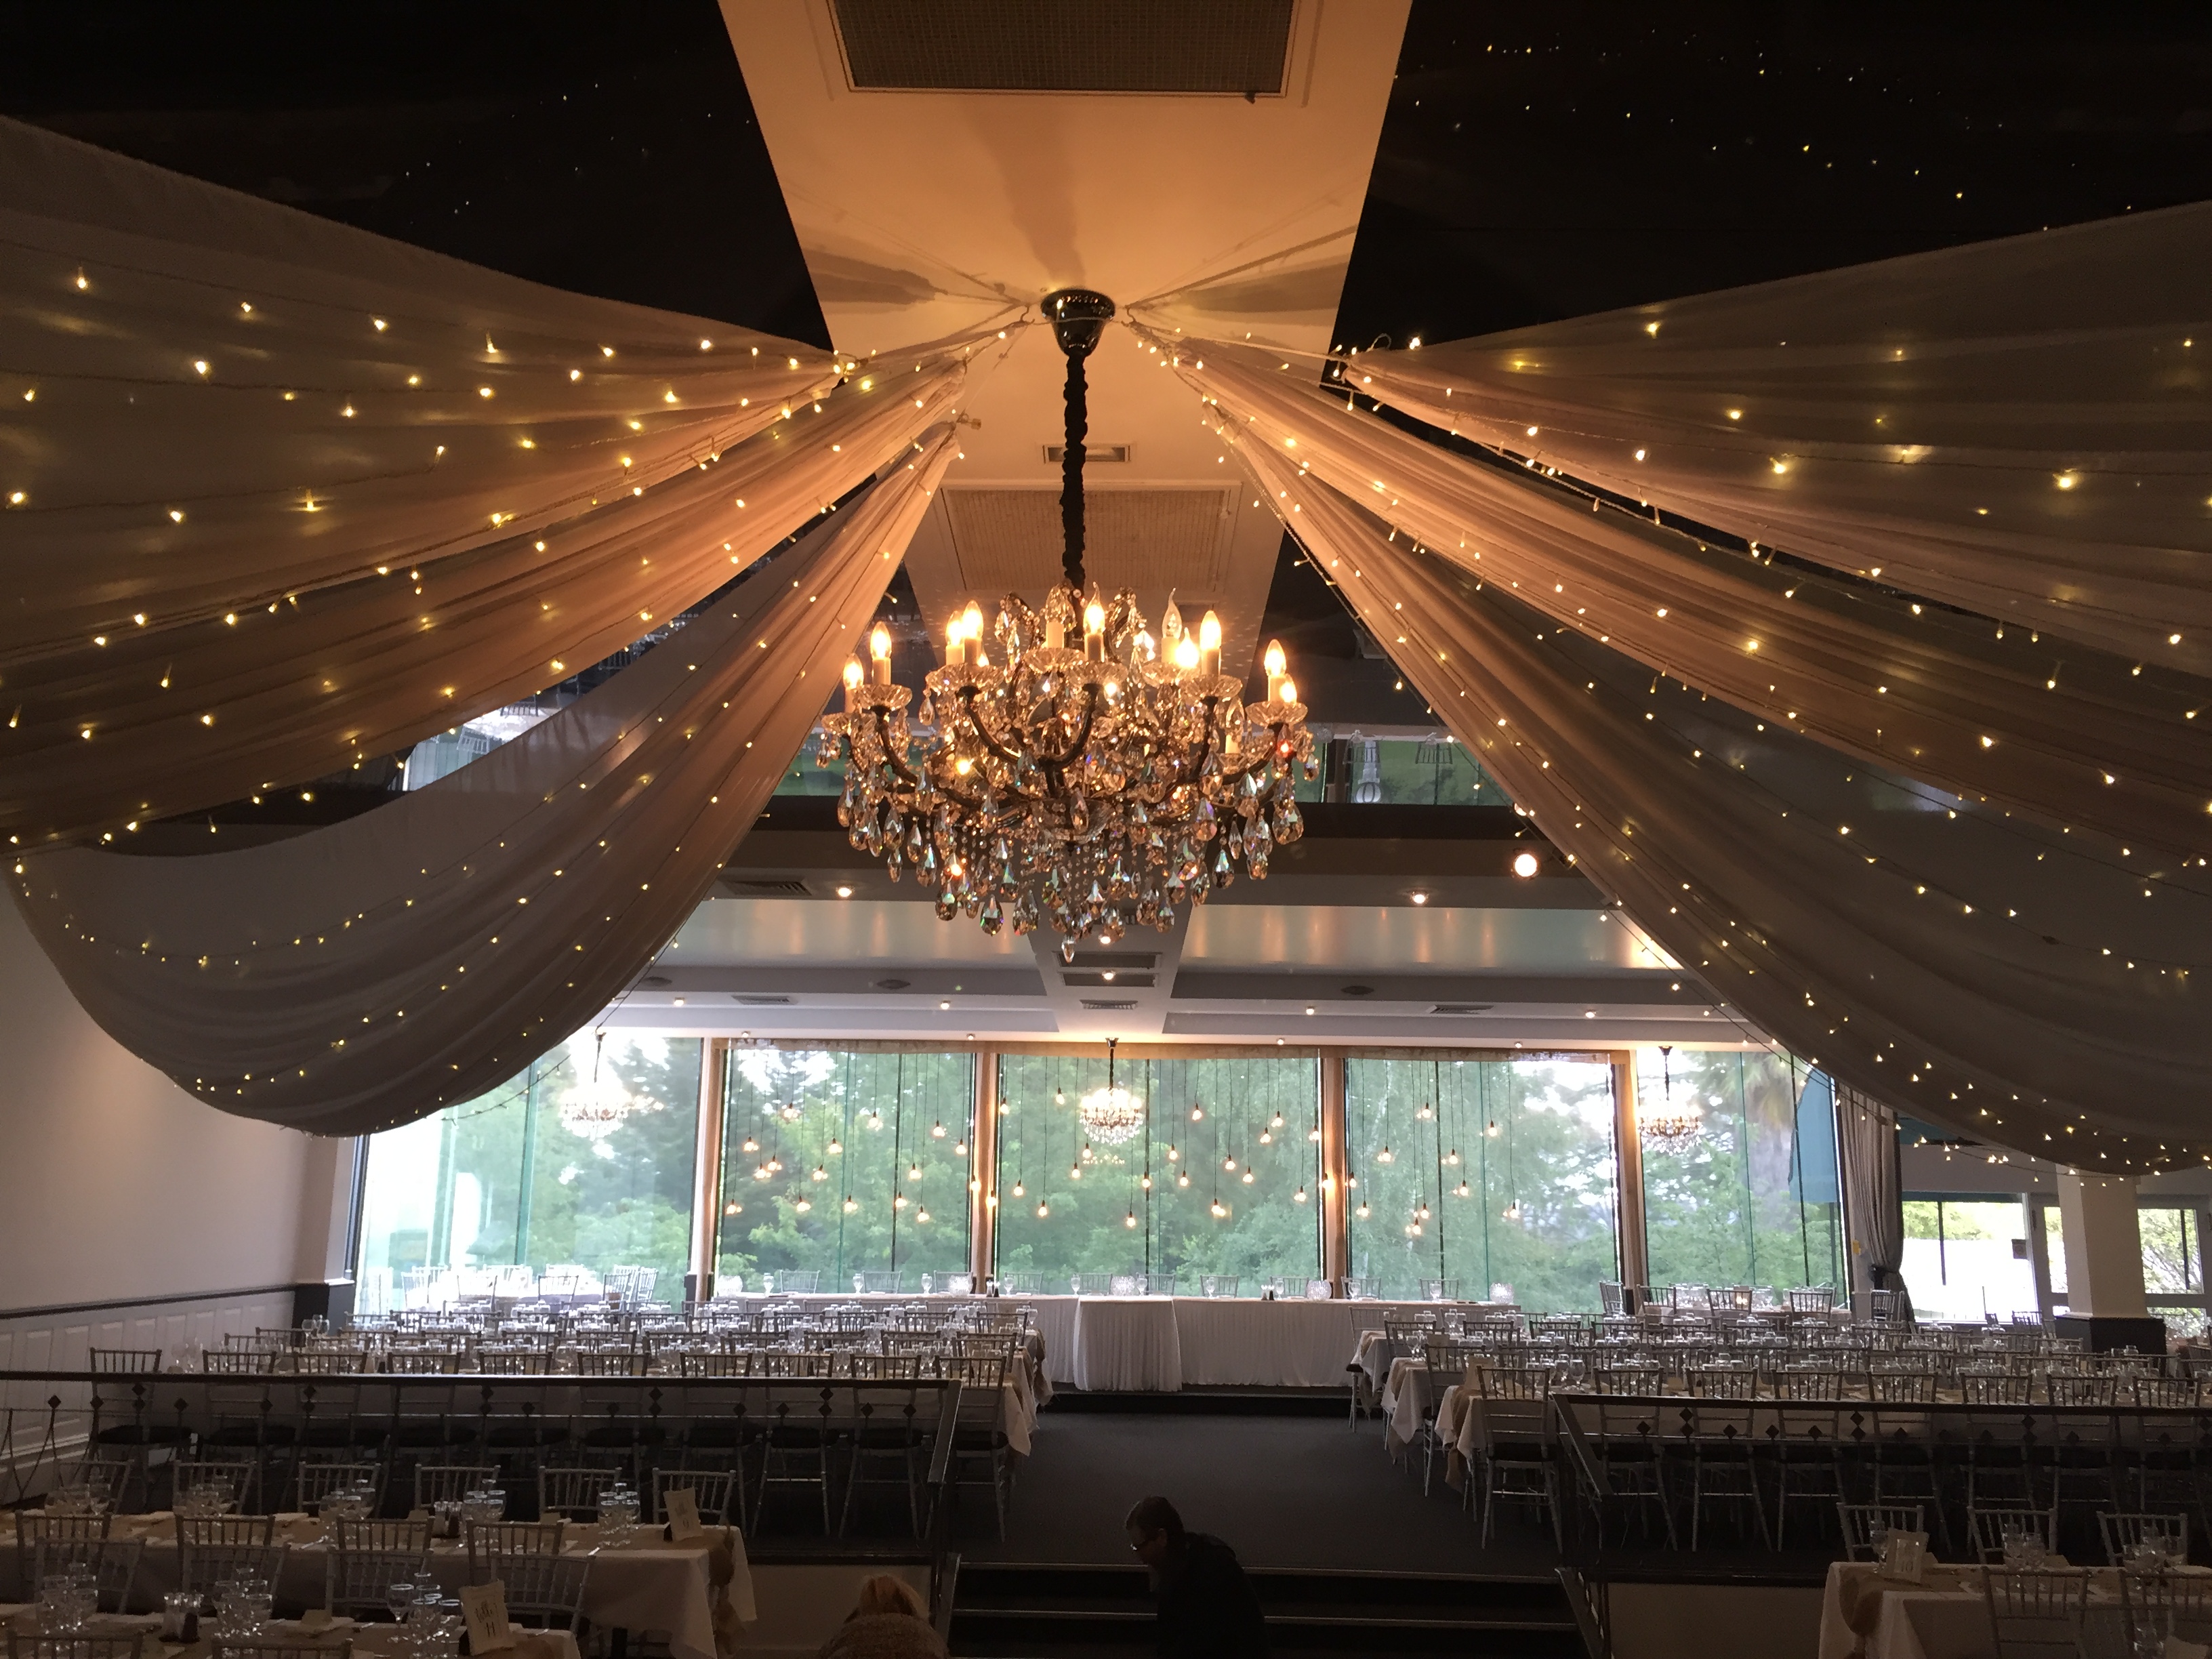 A Lighting & Decor Specialist is One of the Best Ways to Make an Event Brilliant